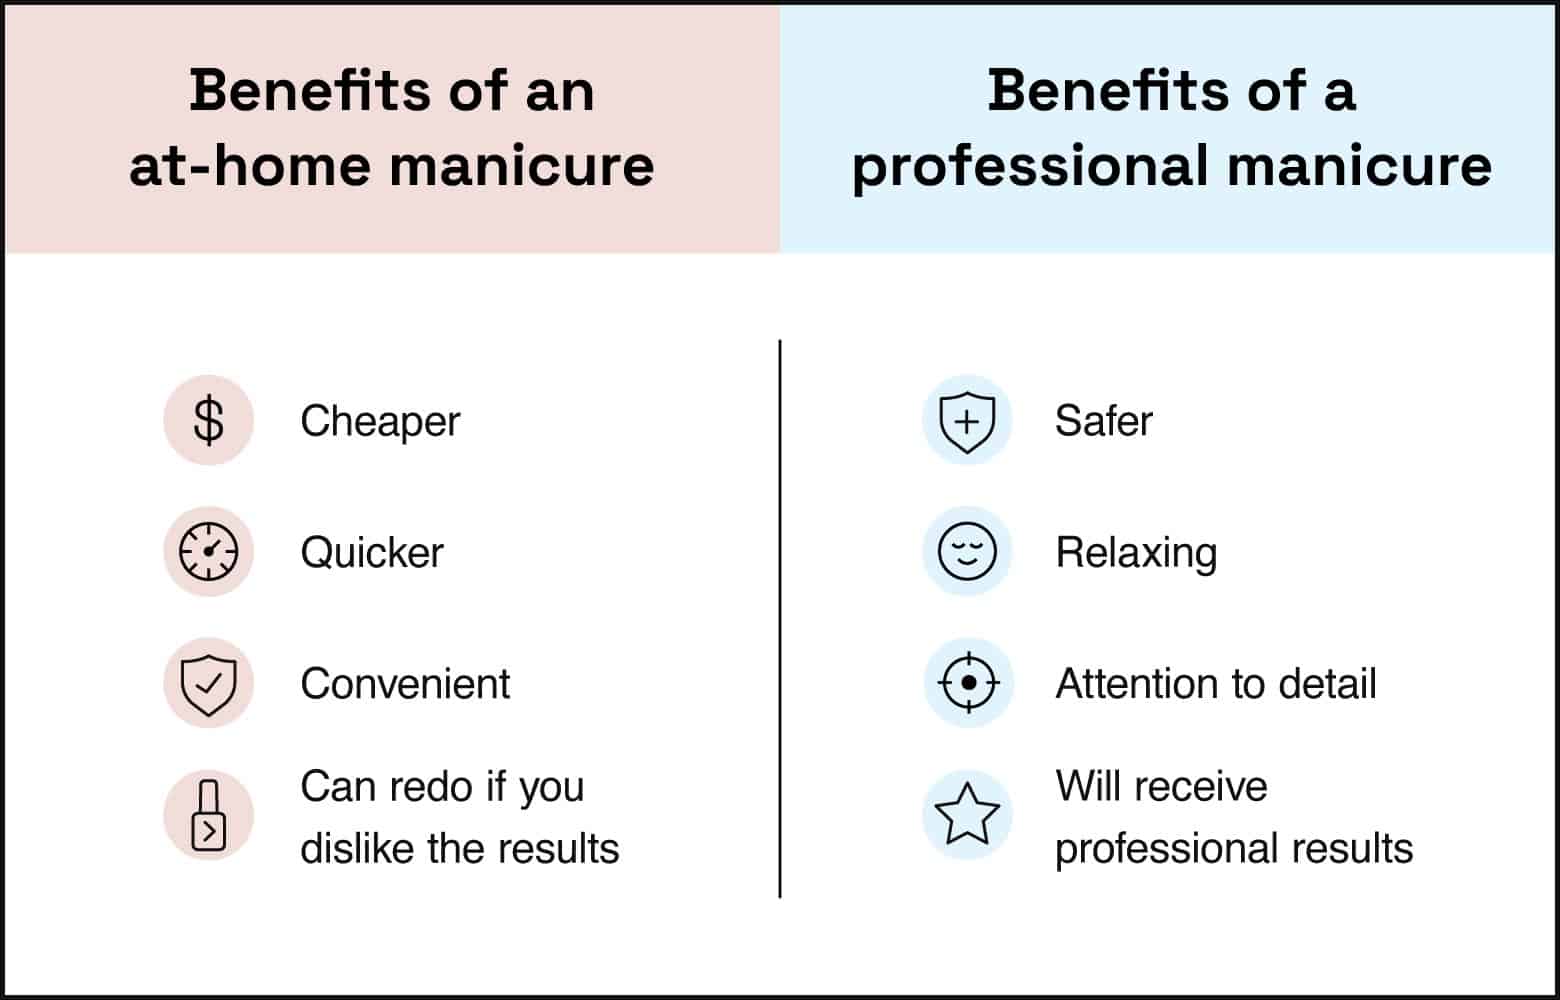 Chart comparing the benefits of at-home manicures to professional manicures, professionals give better and safer results while at home manicures are cheaper and more convenient